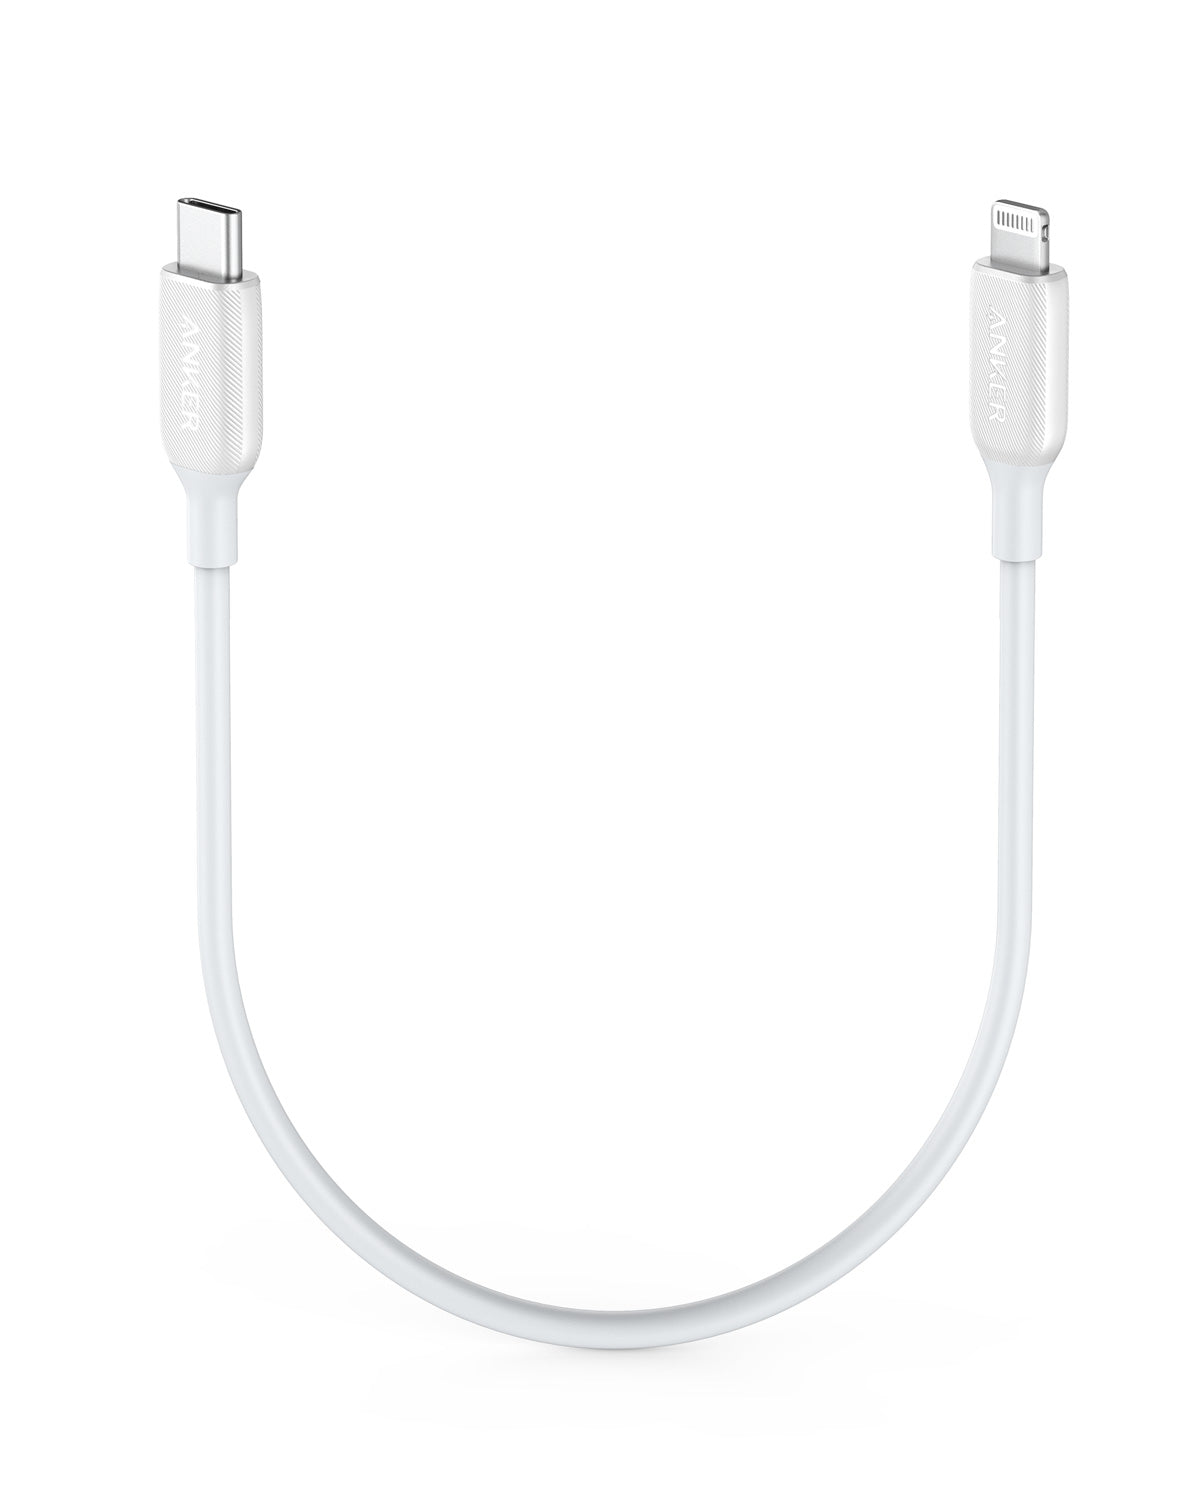 Photos - Cable (video, audio, USB) ANKER 541 USB-C to Lightning Cable  1ft / White A8831021 (1ft / 3ft / 6ft)